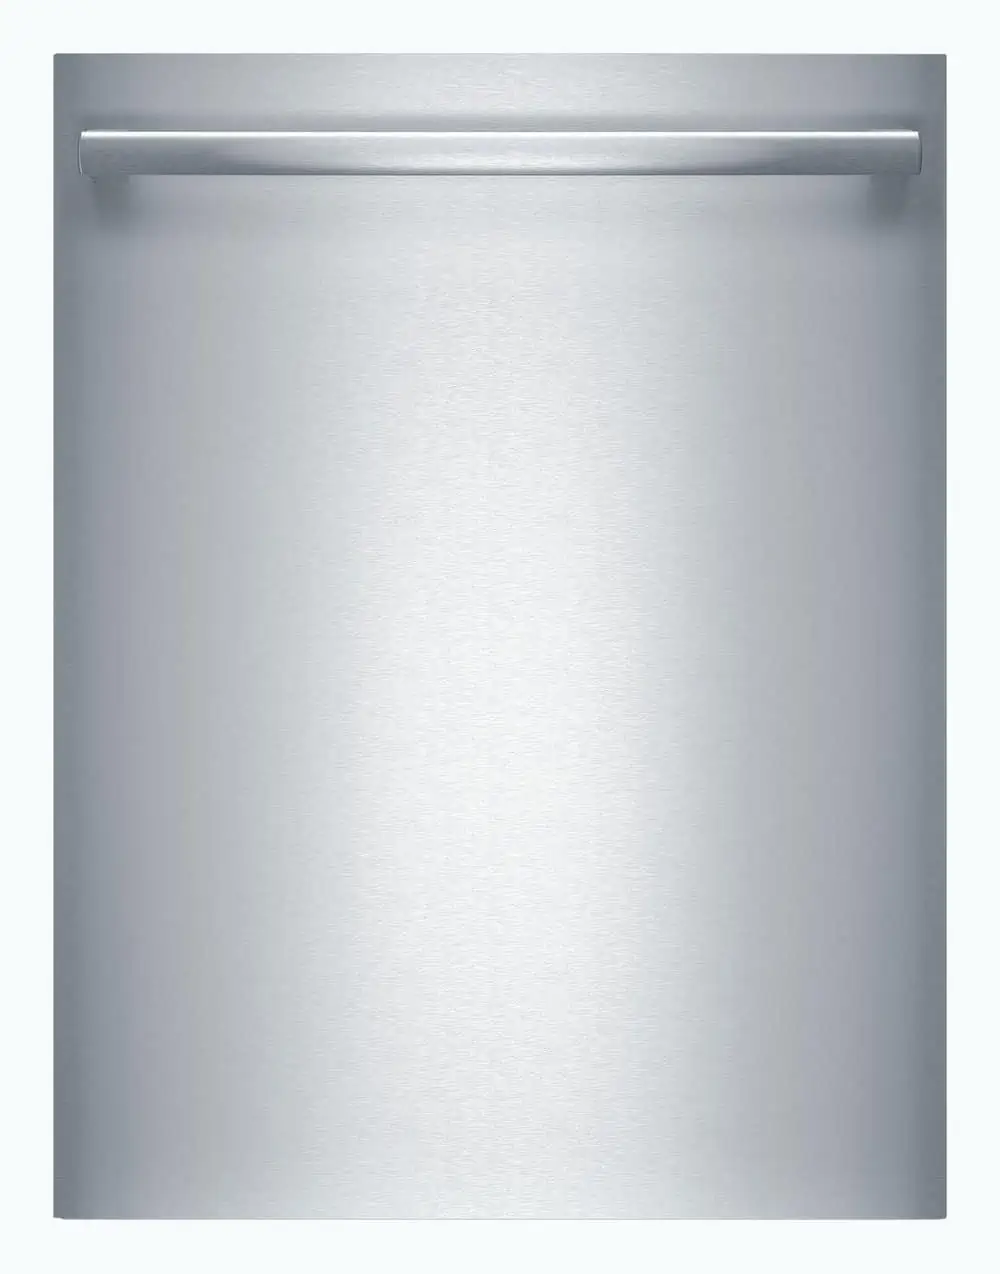 Product Image of the Bosch 800 Series CrystalDry